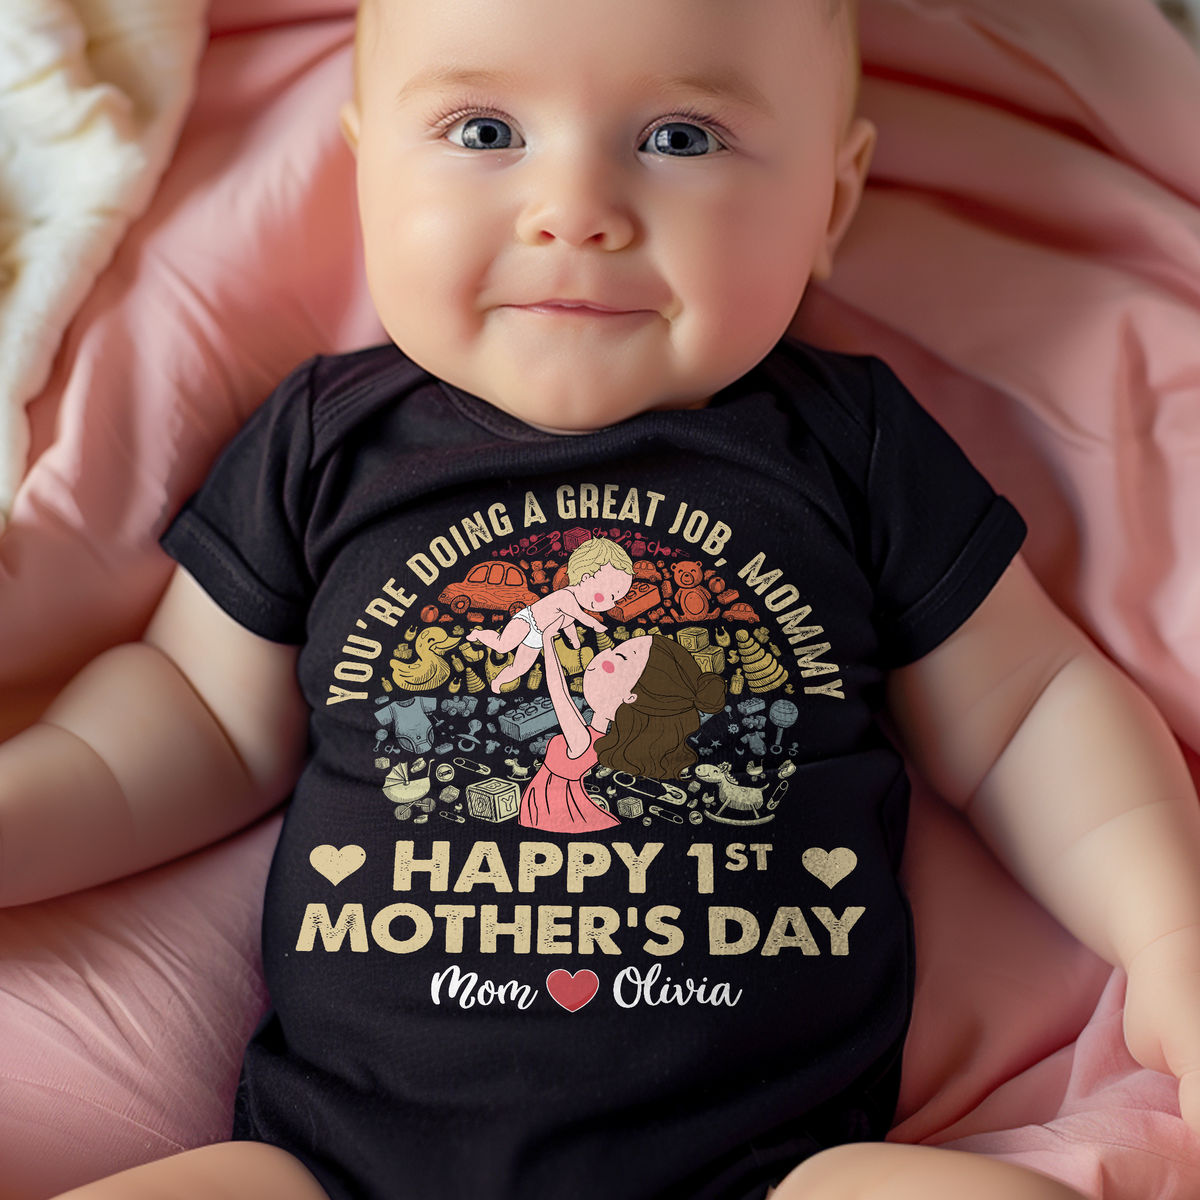 Personalized Onesie - Custom Baby Onesies - You're doing a great job mommy - Happy 1st Mother's Day (43375)